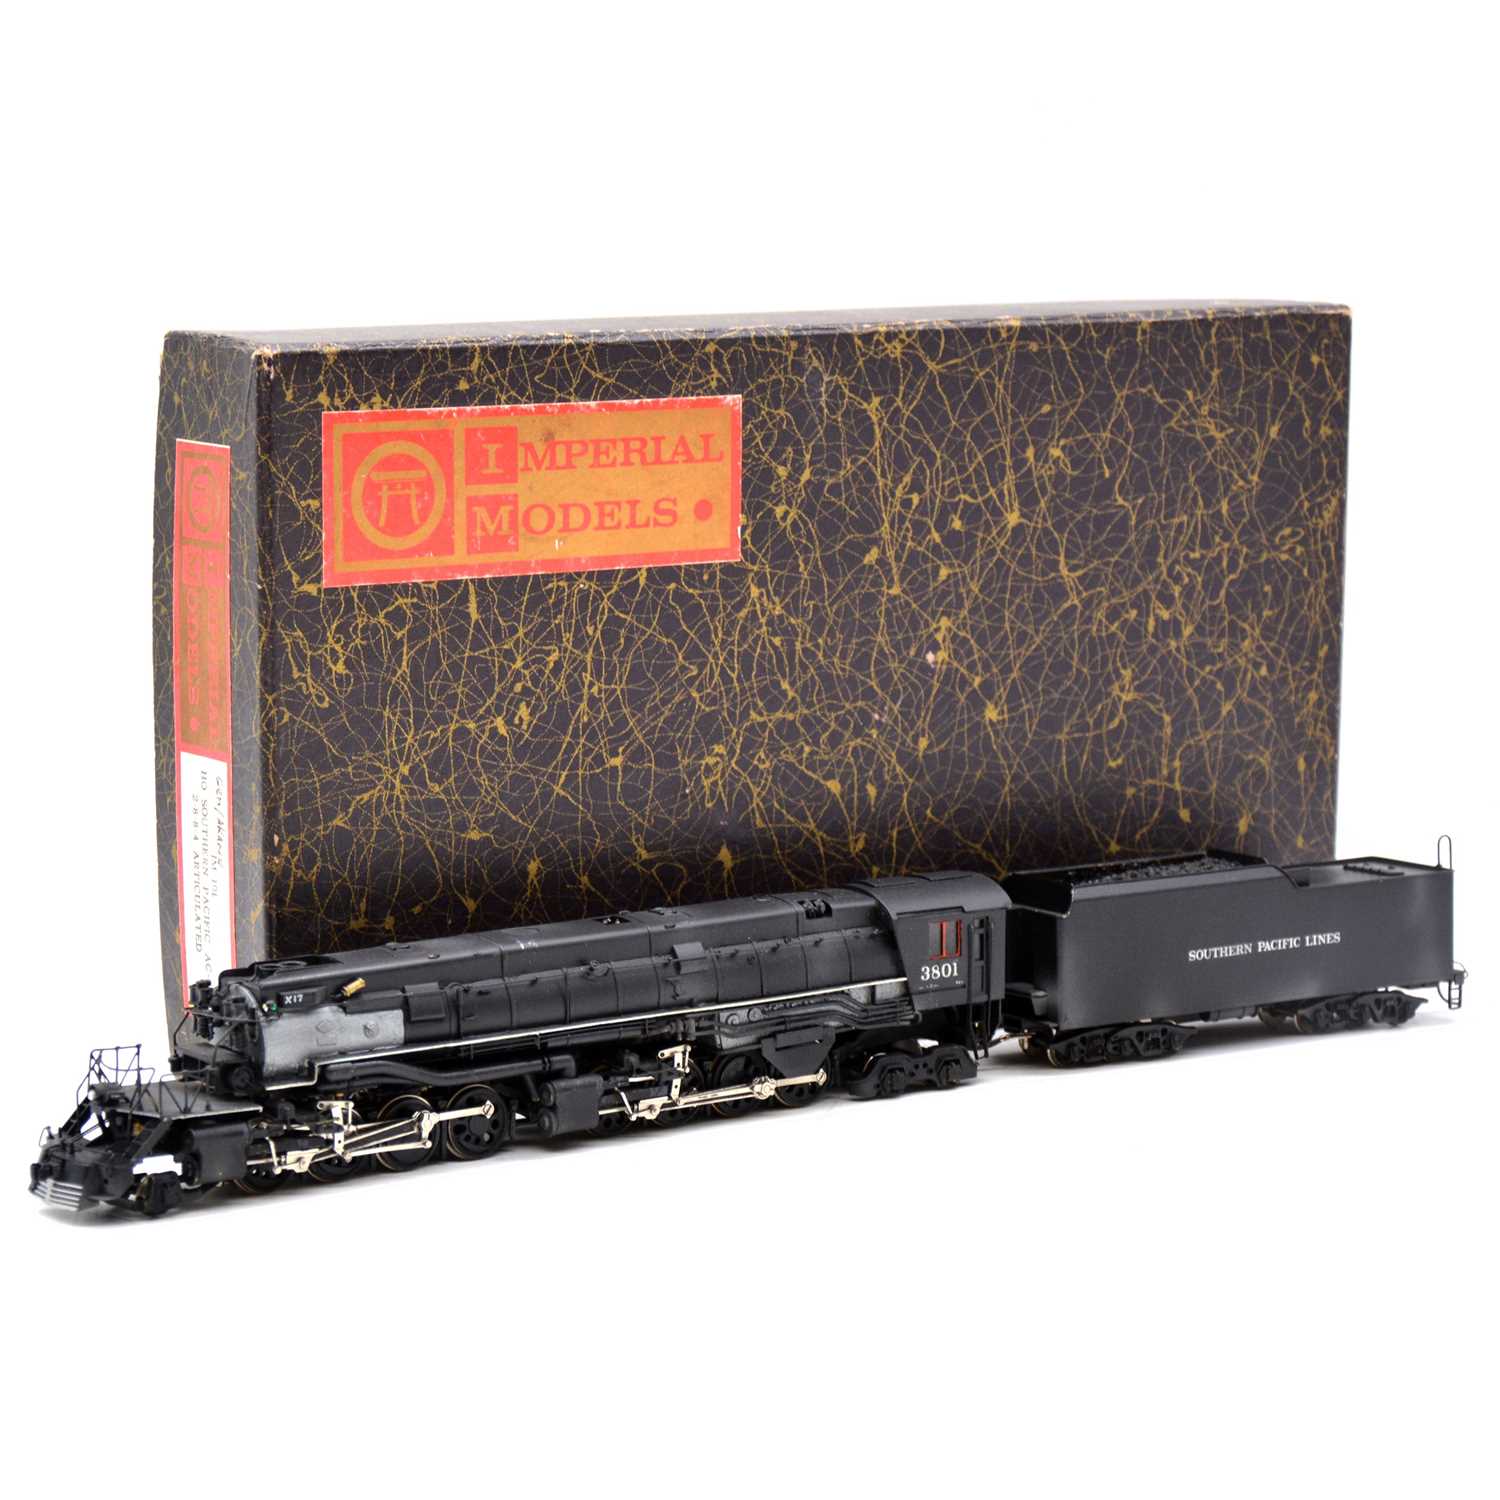 Lot 13 - imperial Models HO gauge steam locomotive and tender, AC-9, boxed